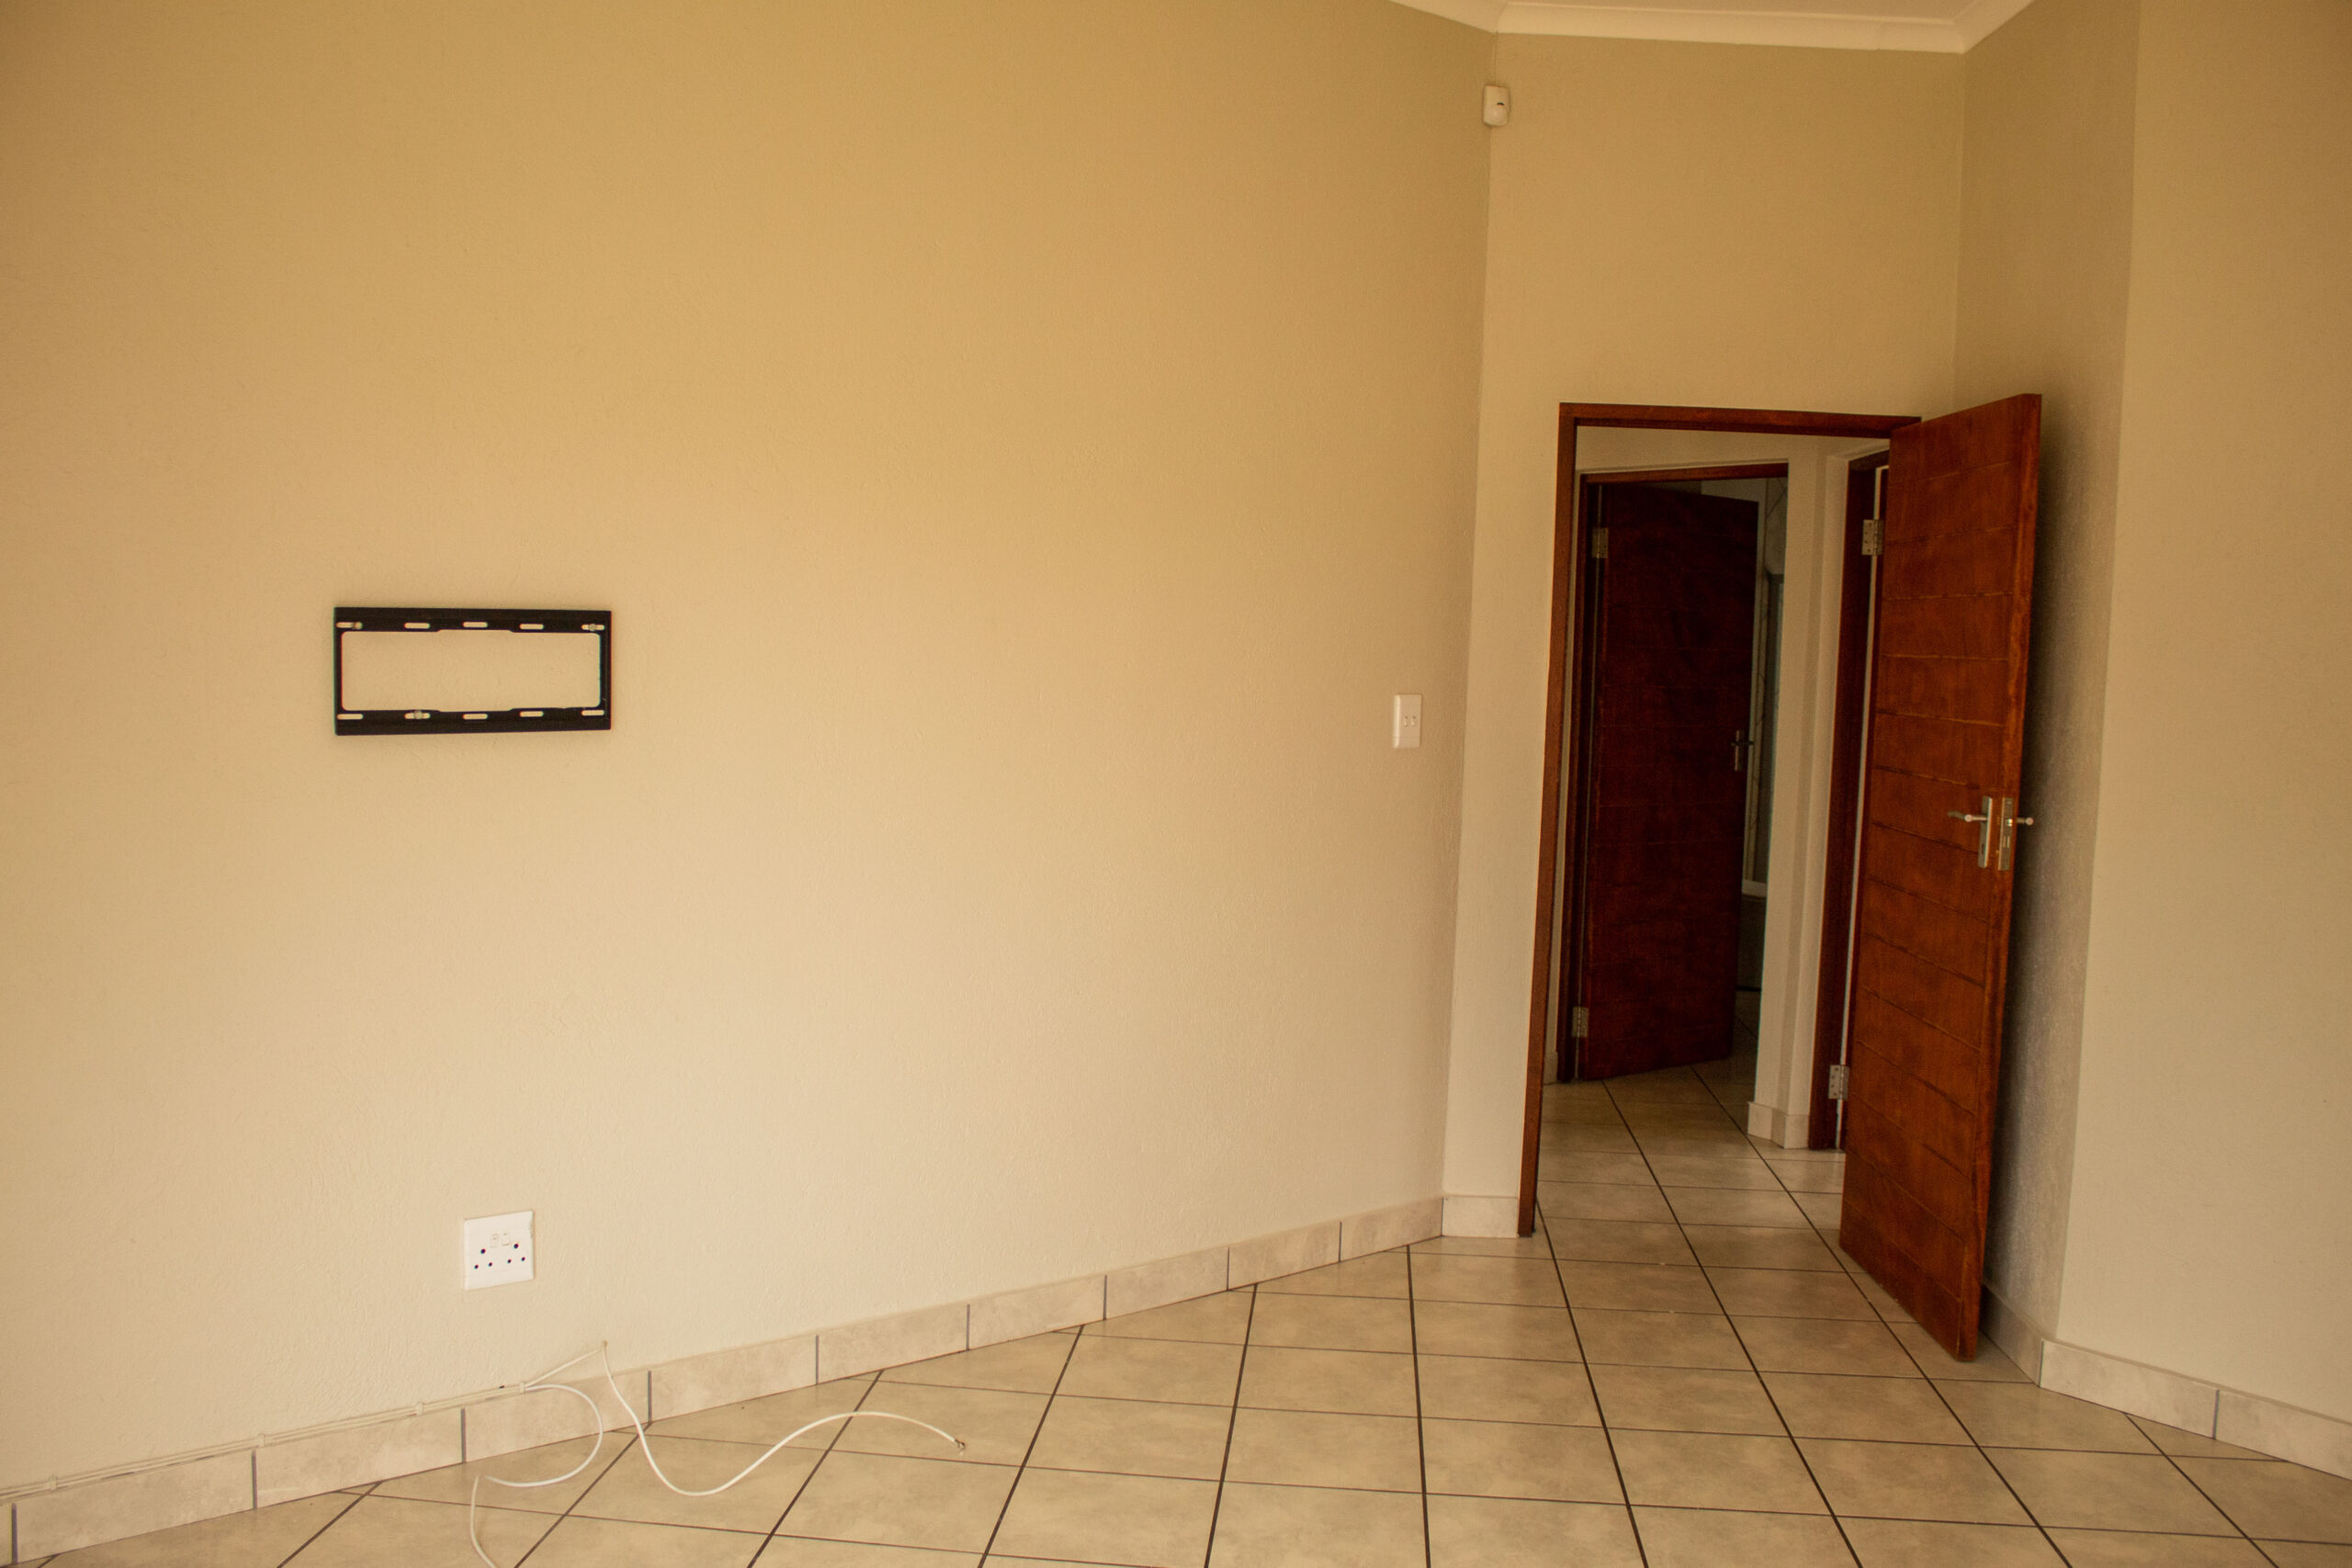 3 Bedroom Townhouse to Rent in White River Mbombela